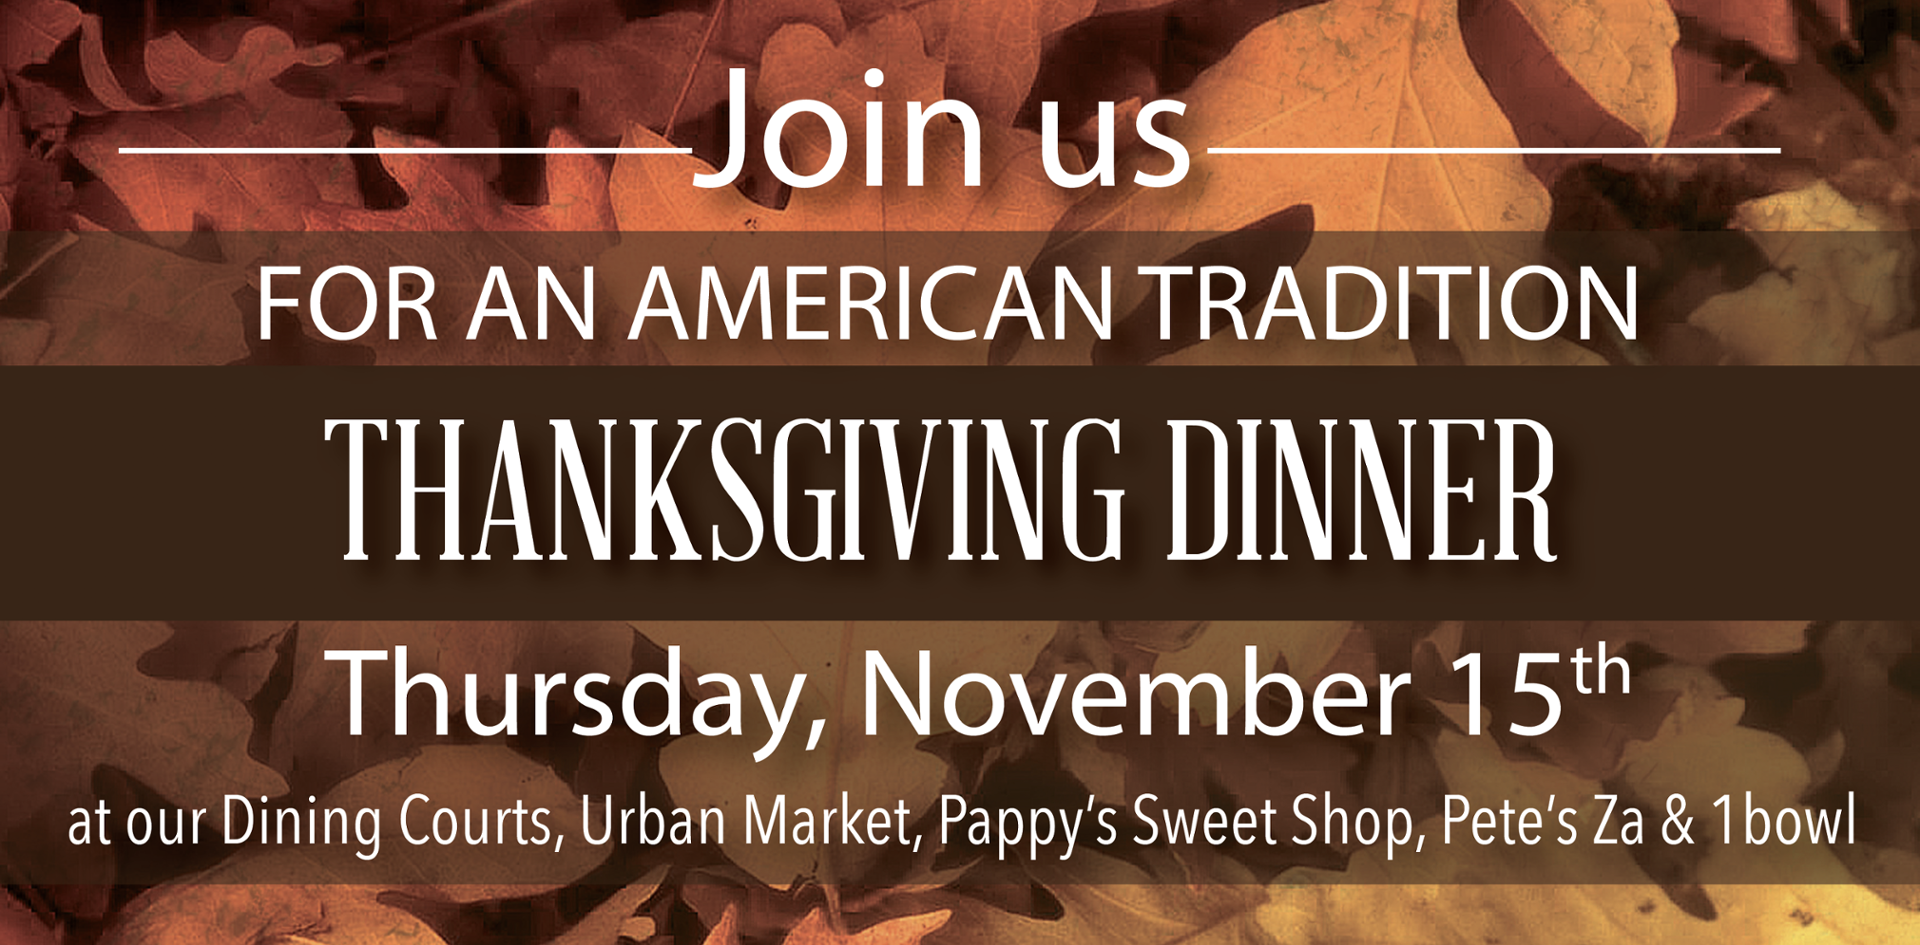 Join Us for an American tradition - Thanksgiving Dinner on Thursday, November 15 in the Dining Courts, Urban Market, Pappy's Sweet Shop, Pete's Za and 1bowl